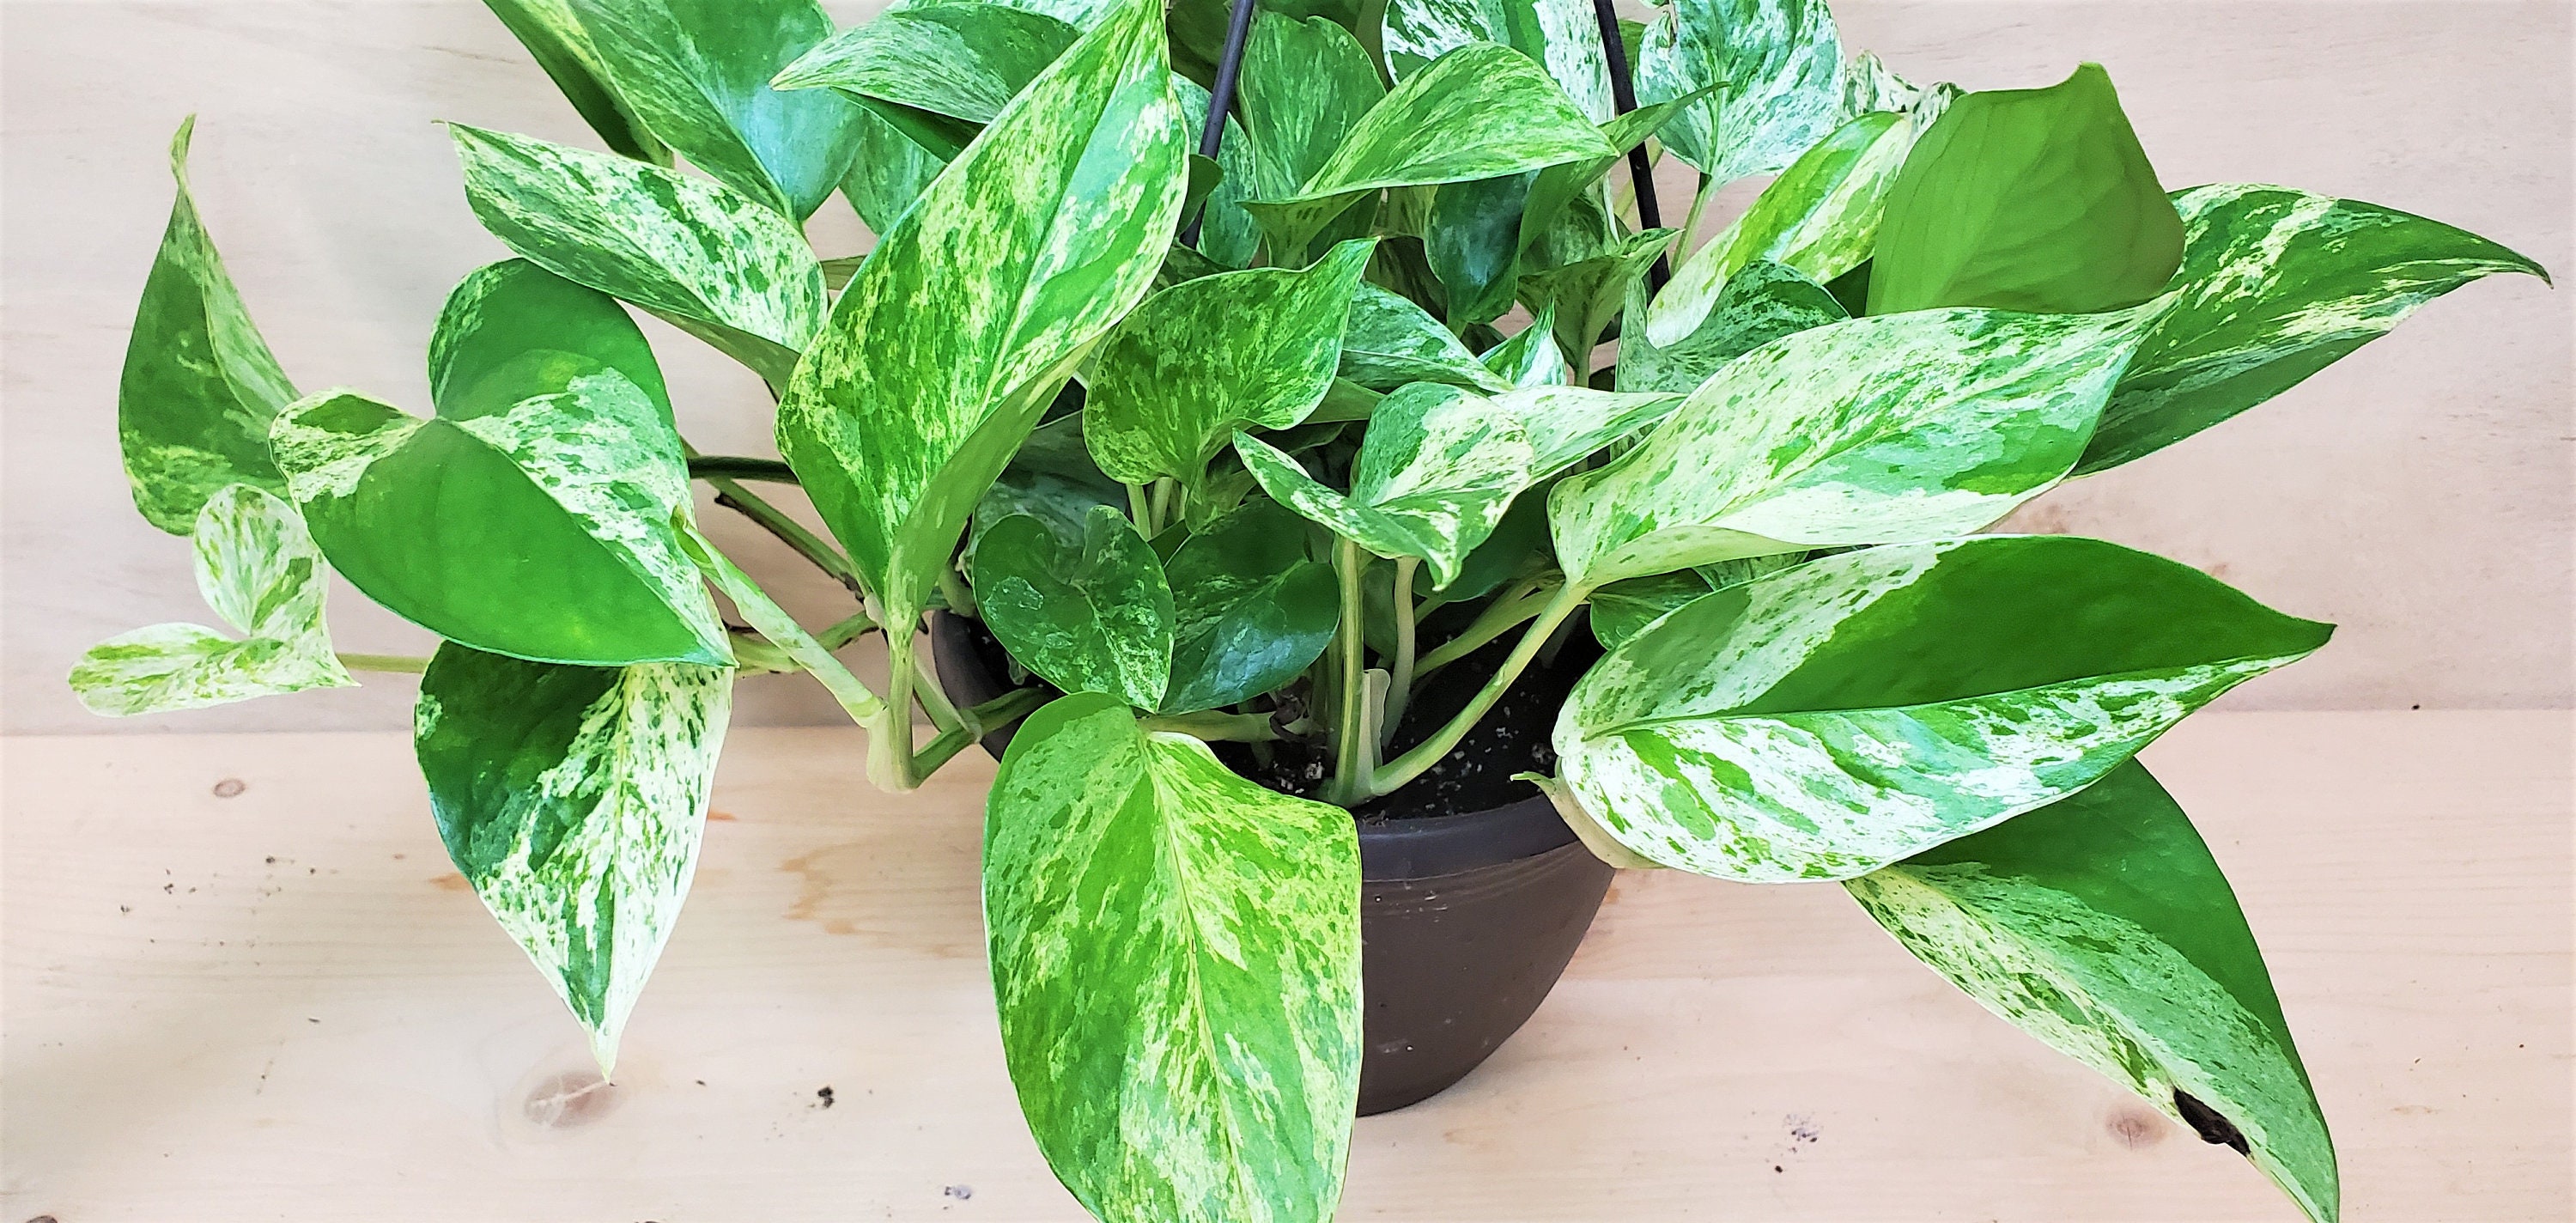 Rare Marble Queen Pothos variegated indoor live Plant Snow | Etsy